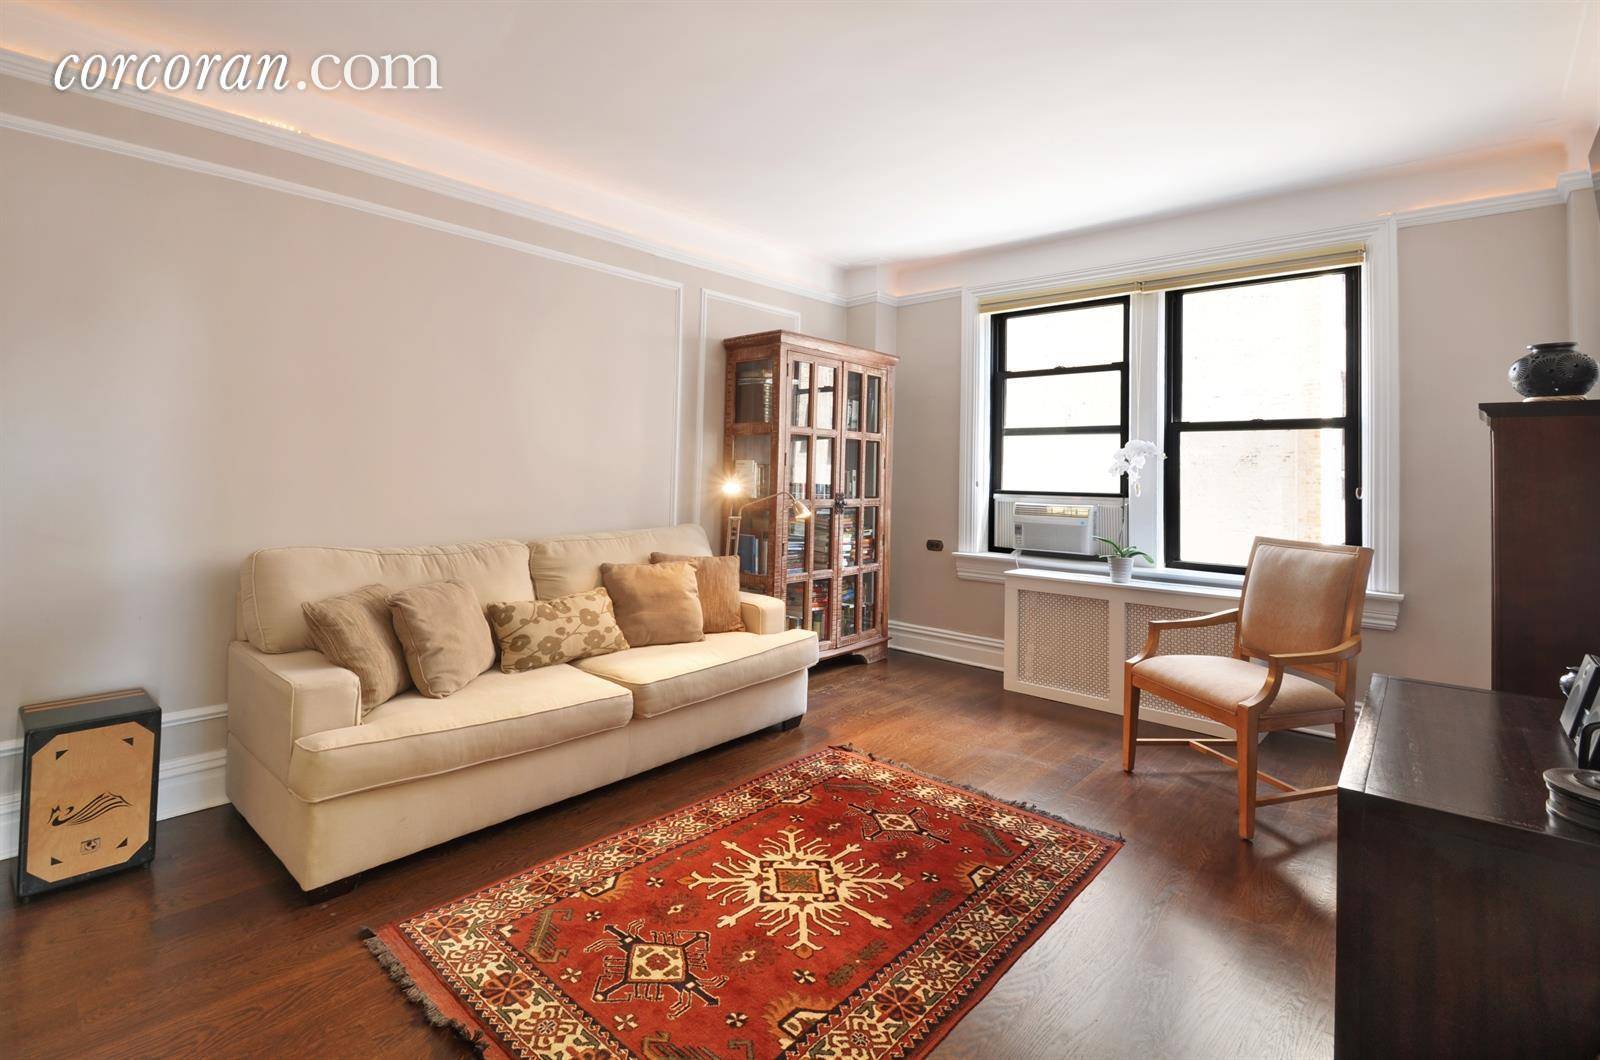 This generously sized, corner one bedroom apartment in a classic prewar Rosario Candela Upper West Side building draws you in with its original detailing, thoughtful layout, and lots of windows.